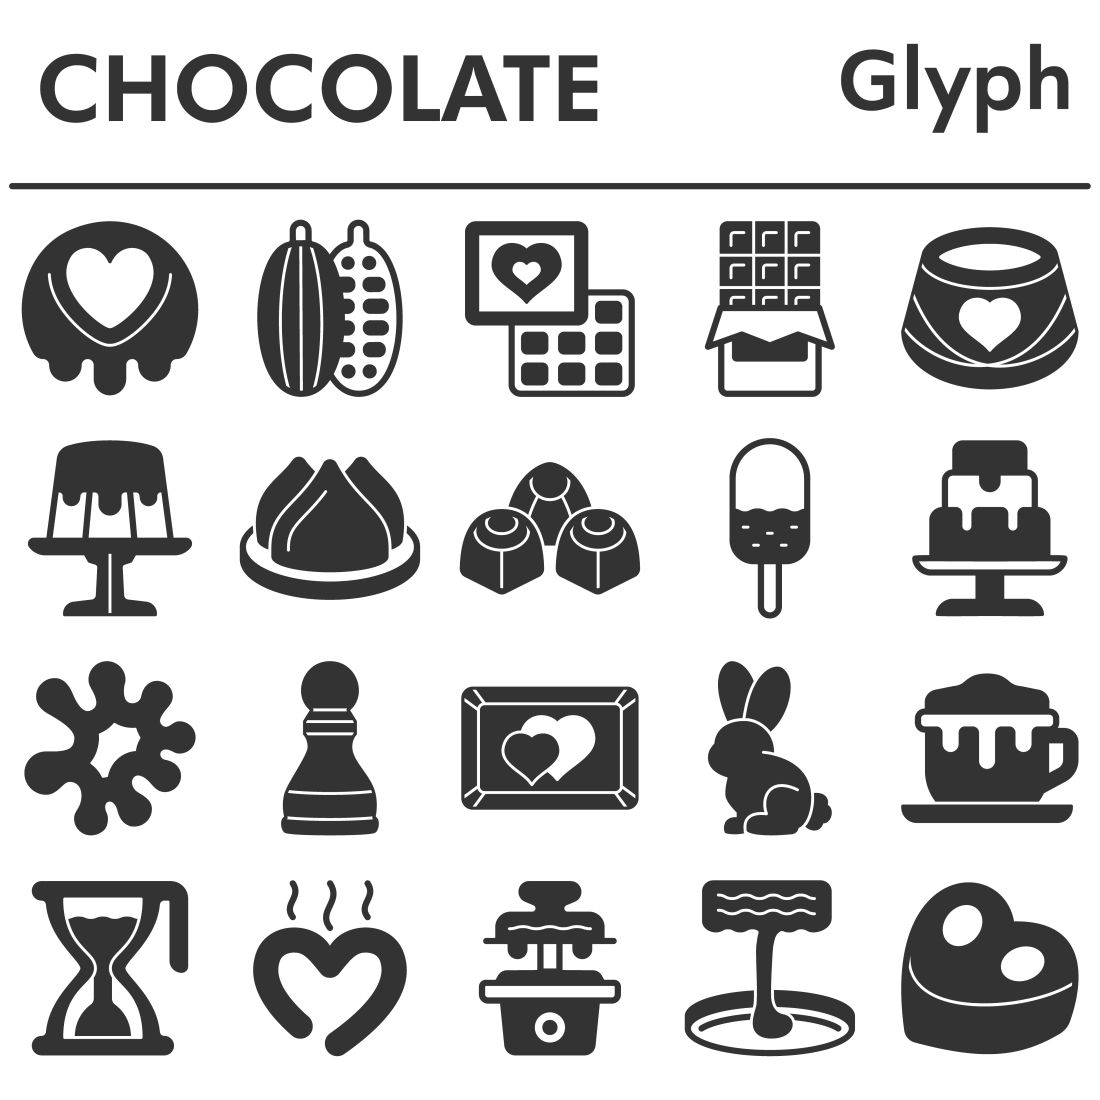 Chocolate icons set, glyph style cover image.